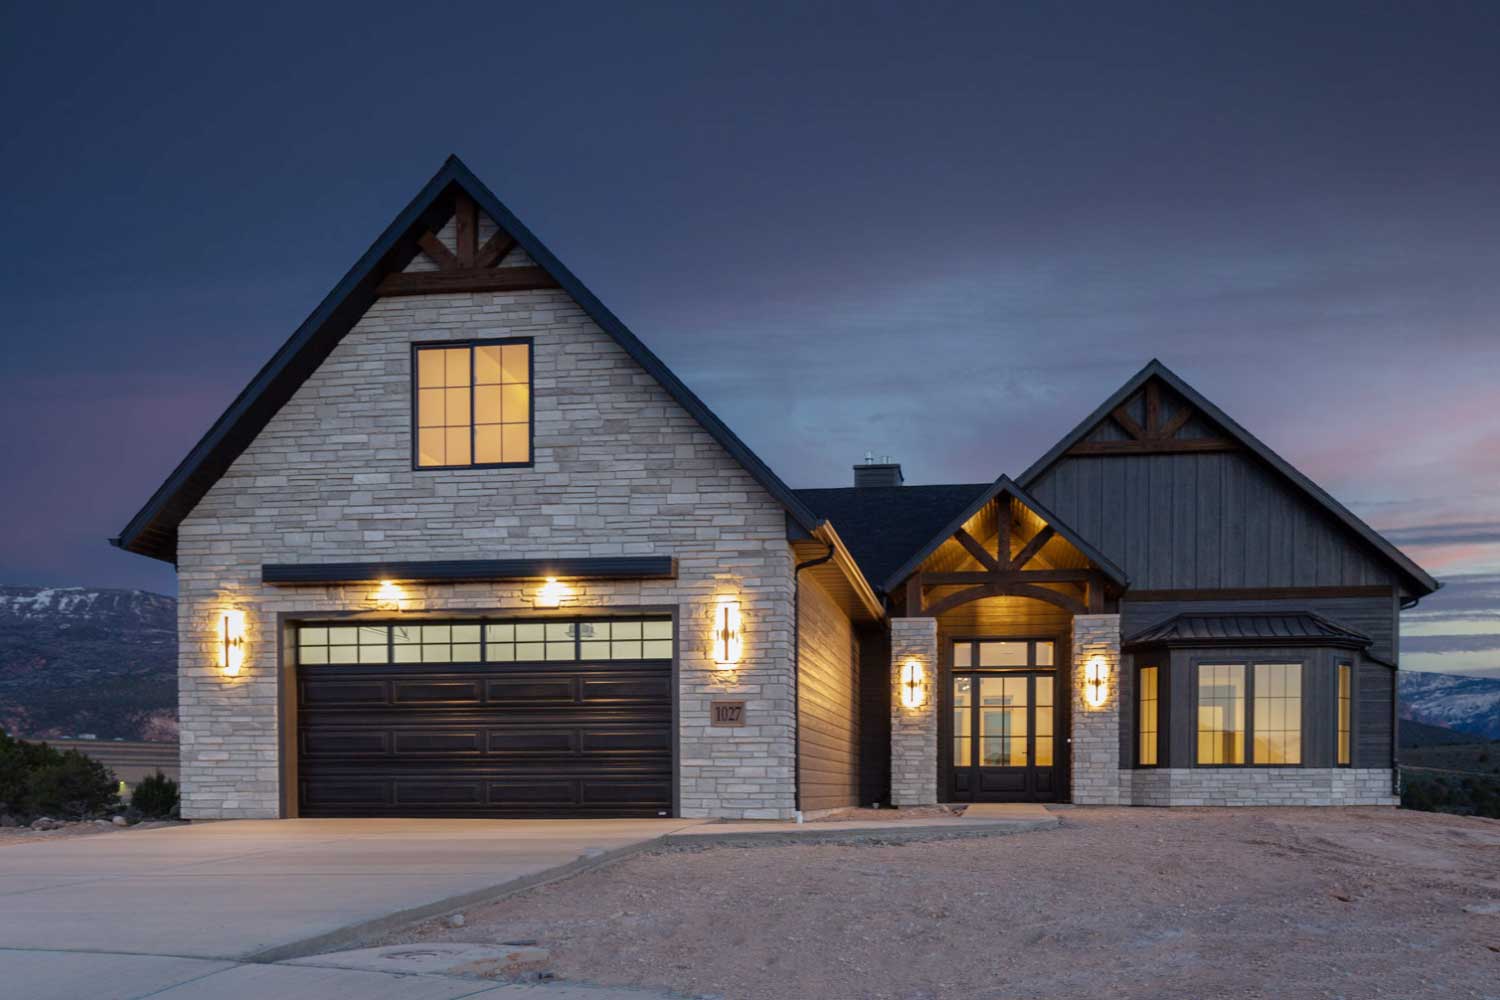 Front view of custom home at dusk featuring outdoor lighting that highlights the stone and wood exterior